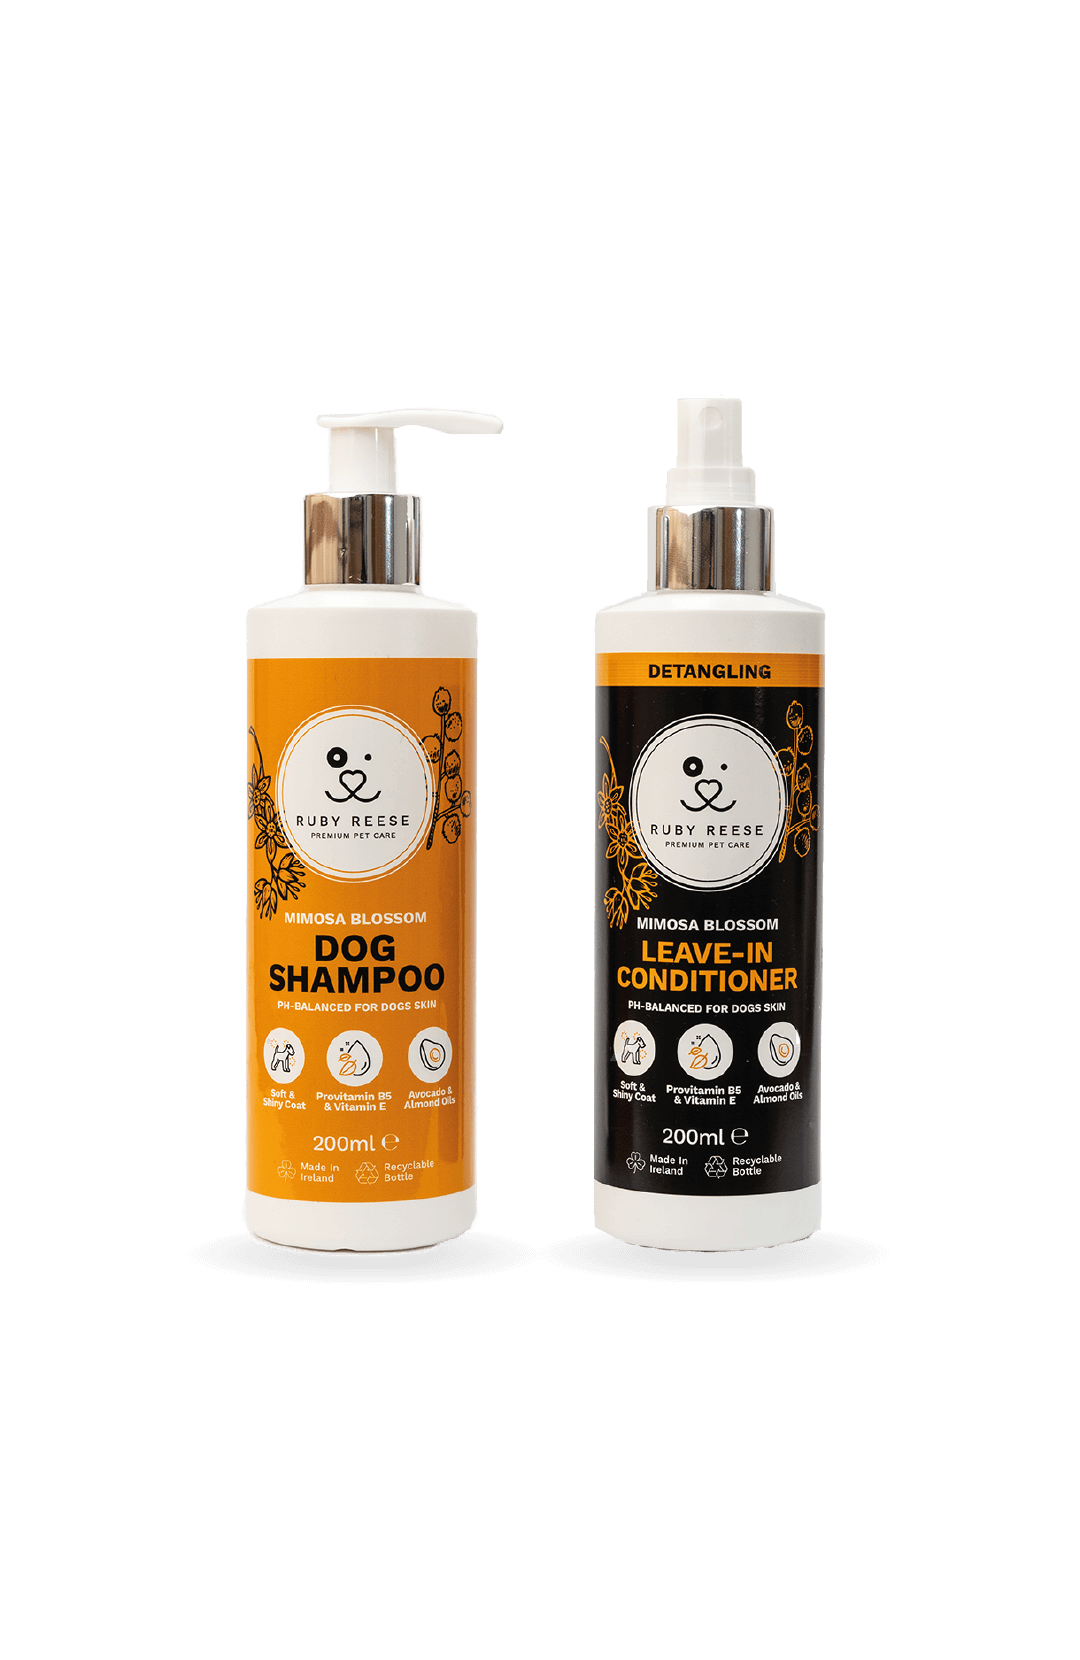 RUBY REESE MIMOSA BLOSSOM DOG SHAMPOO and RUBY REESE MIMOSA BLOSSOM LEAVE-IN CONDITIONEr for dogs placed side by side 